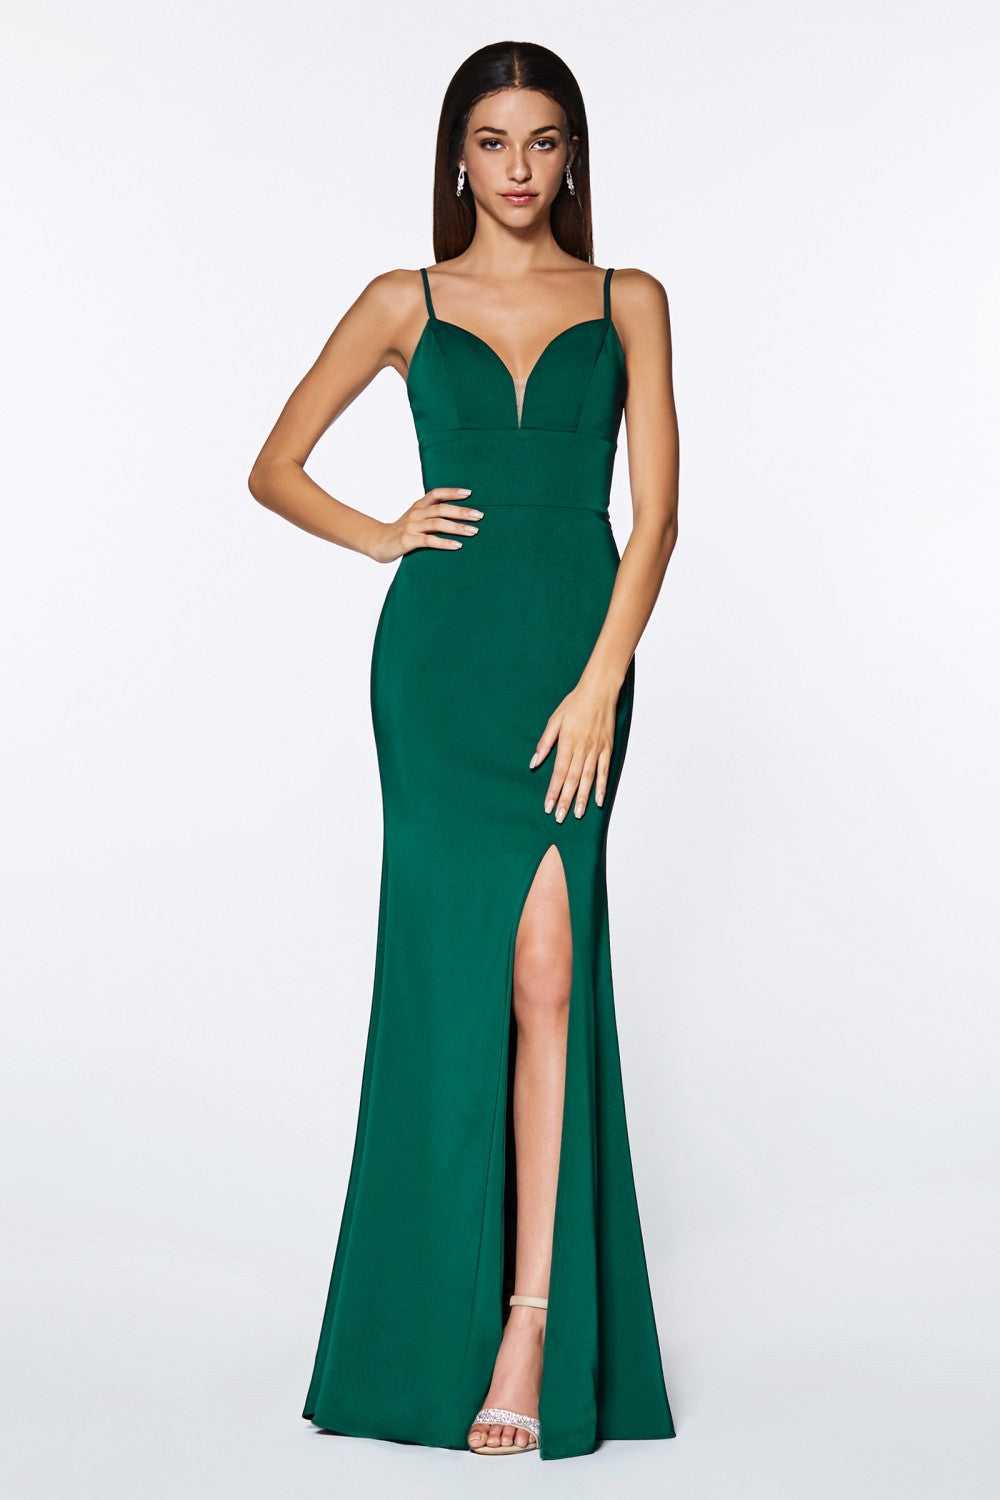 MyFashion.com - Fitted sweetheart neckline gown with leg slit and open back(7470) - Cinderella Divine promdress eveningdress fashion partydress weddingdress 
 gown homecoming promgown weddinggown 